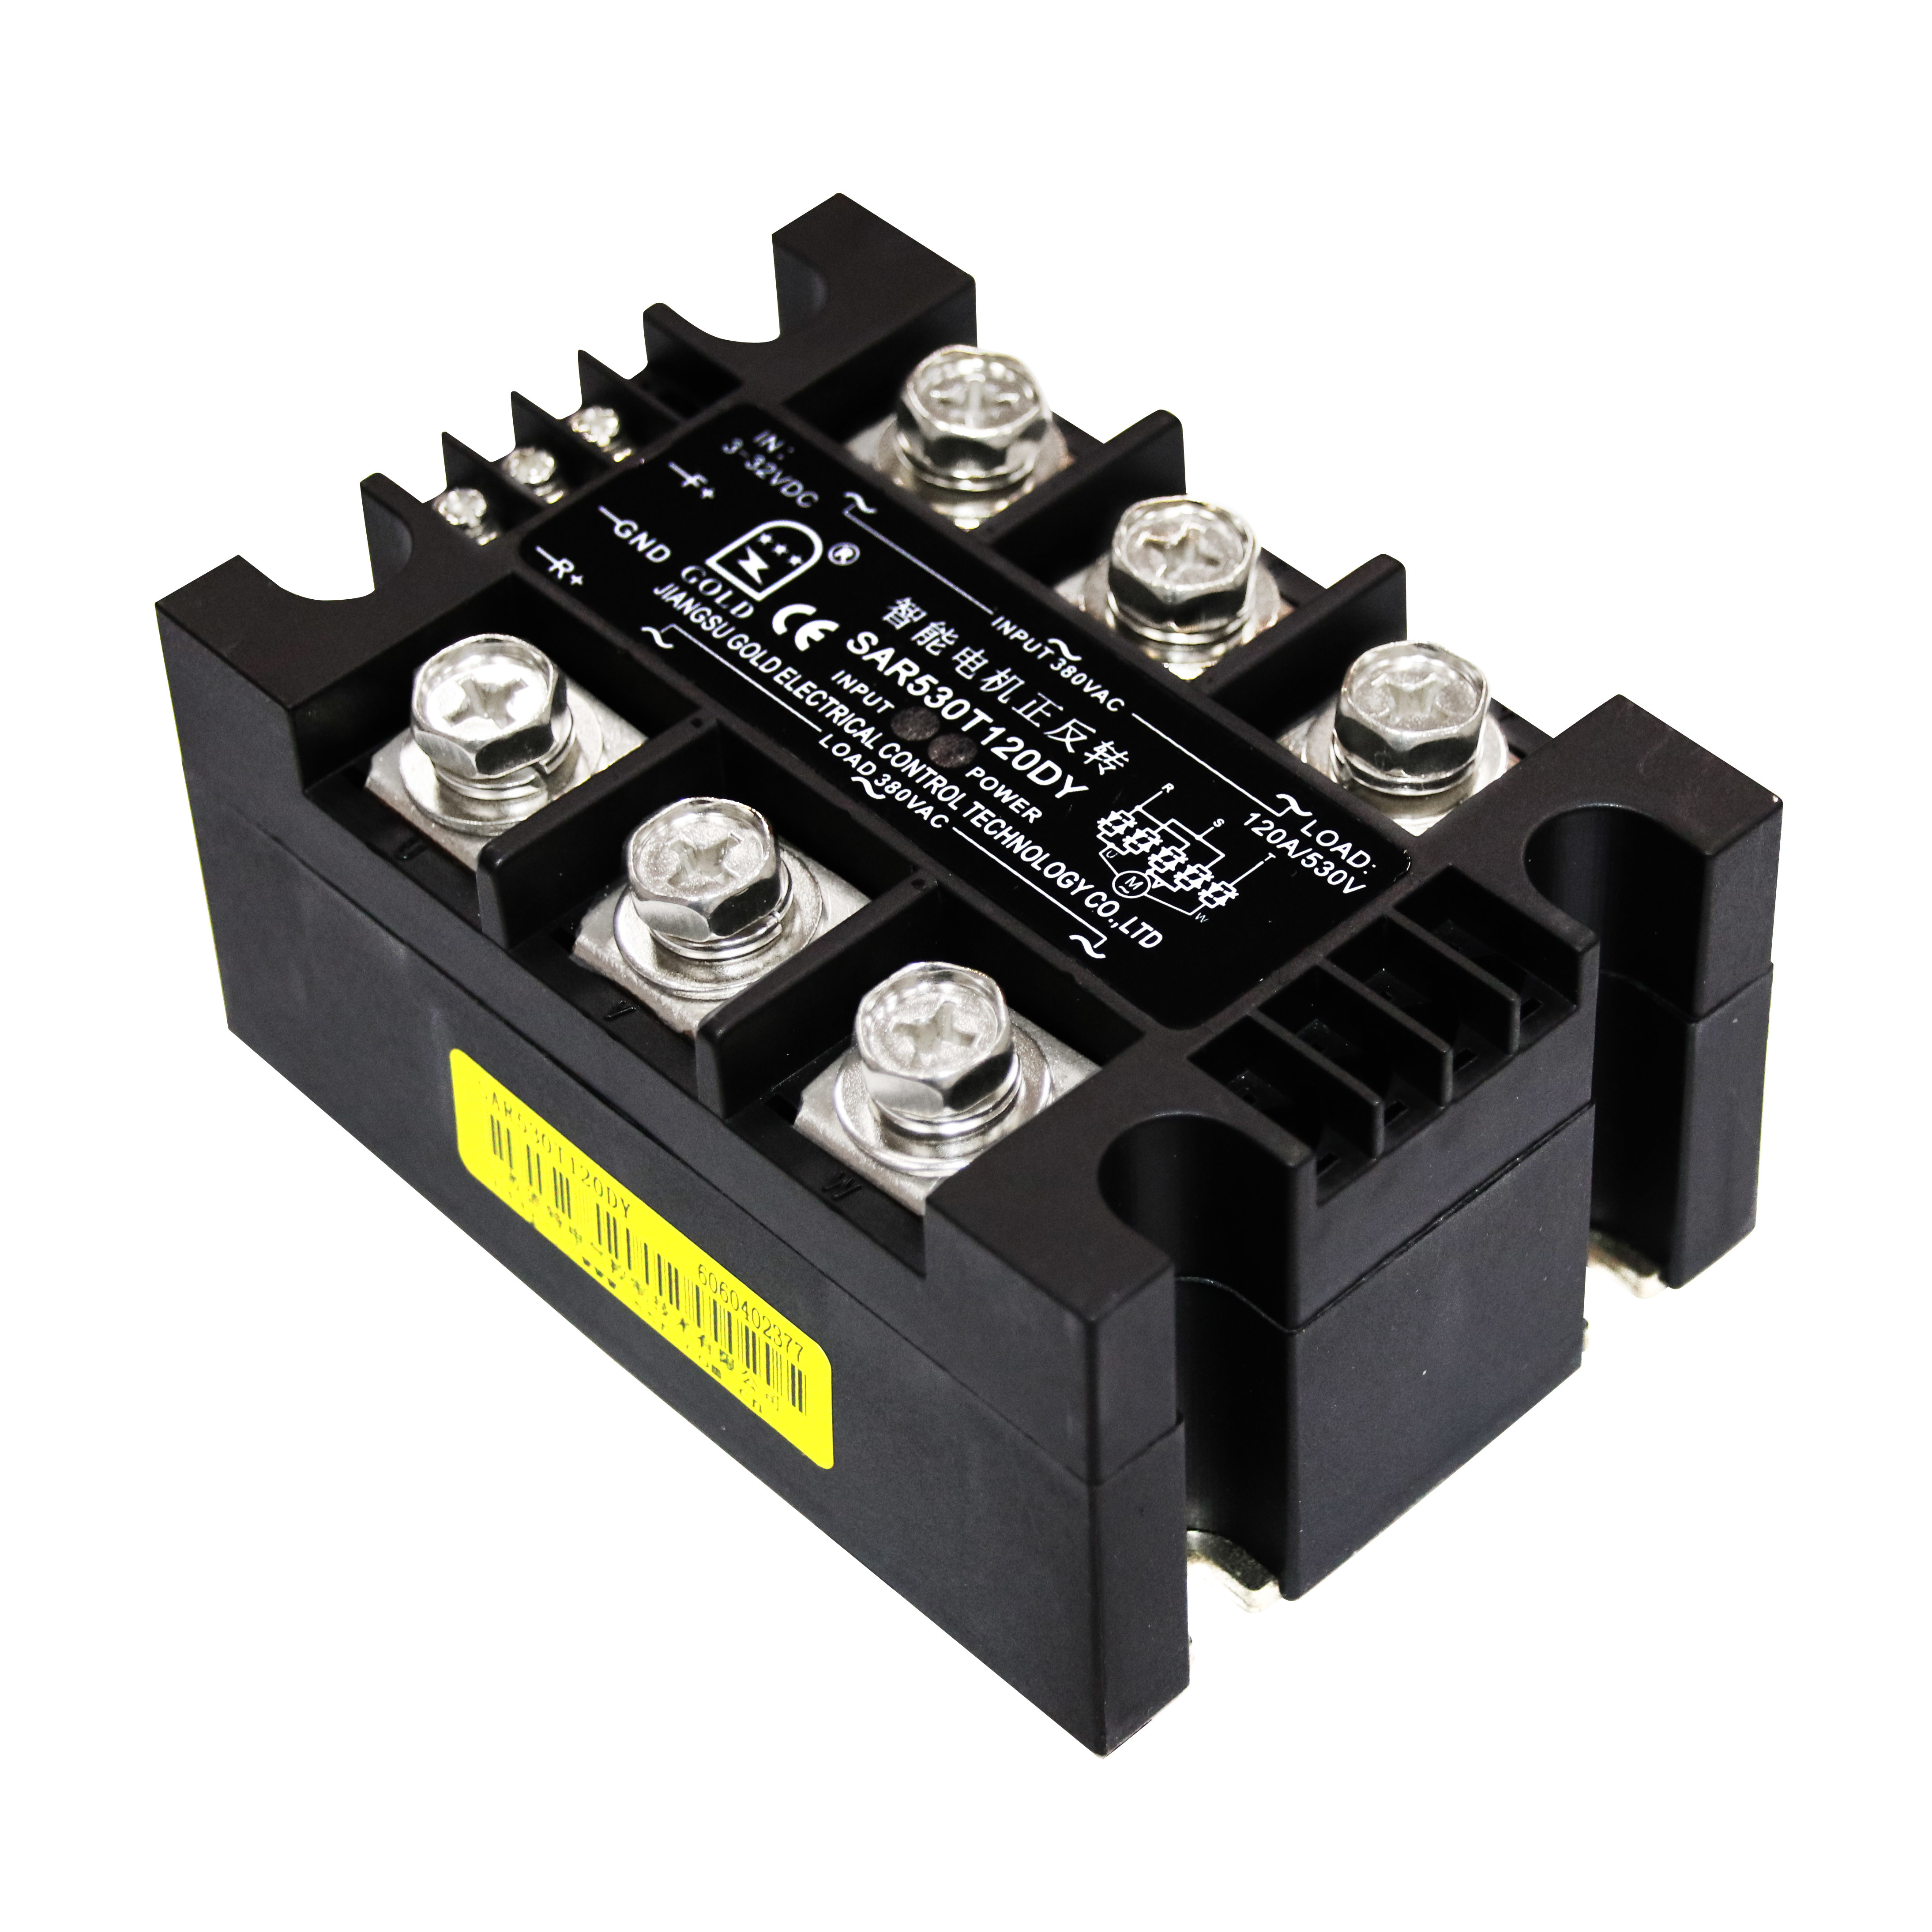 Buy cheap 7.5A 240 Volt AC Motor Controller product